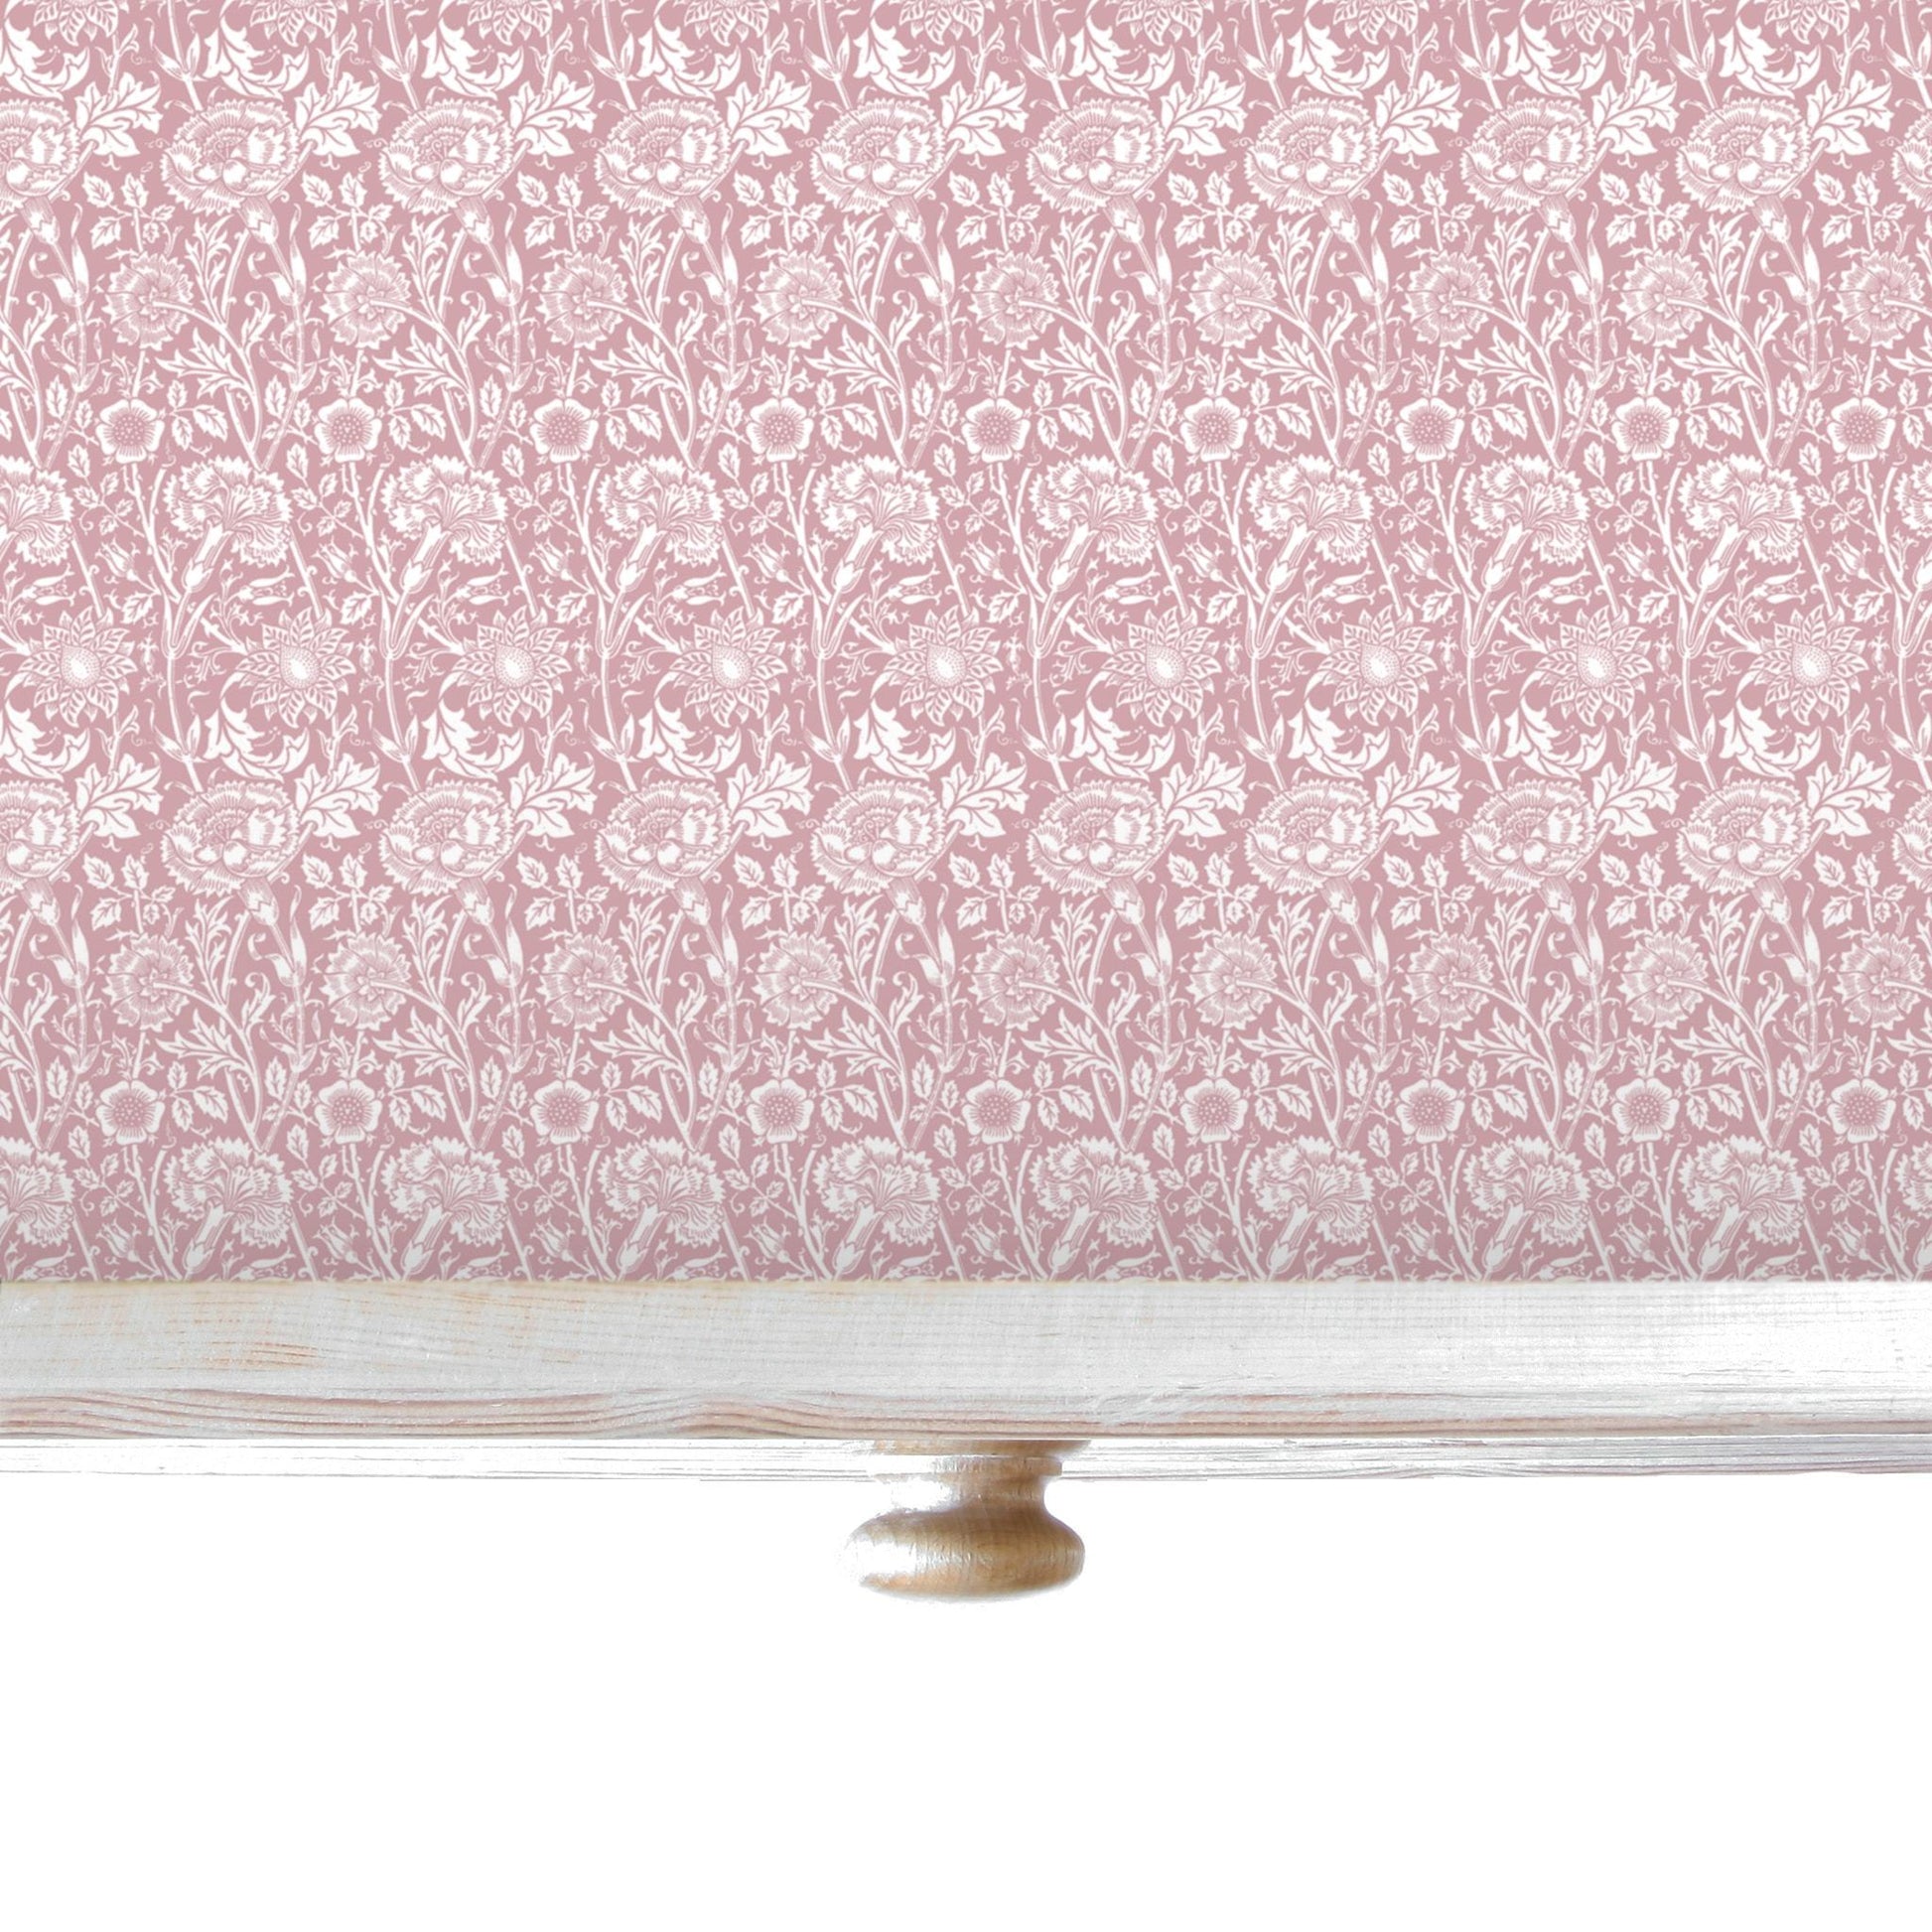 THE MASTER HERBALIST ROSE fragrance SCENTED Drawer Liners in PINK William Morris Design. Made in Britain.